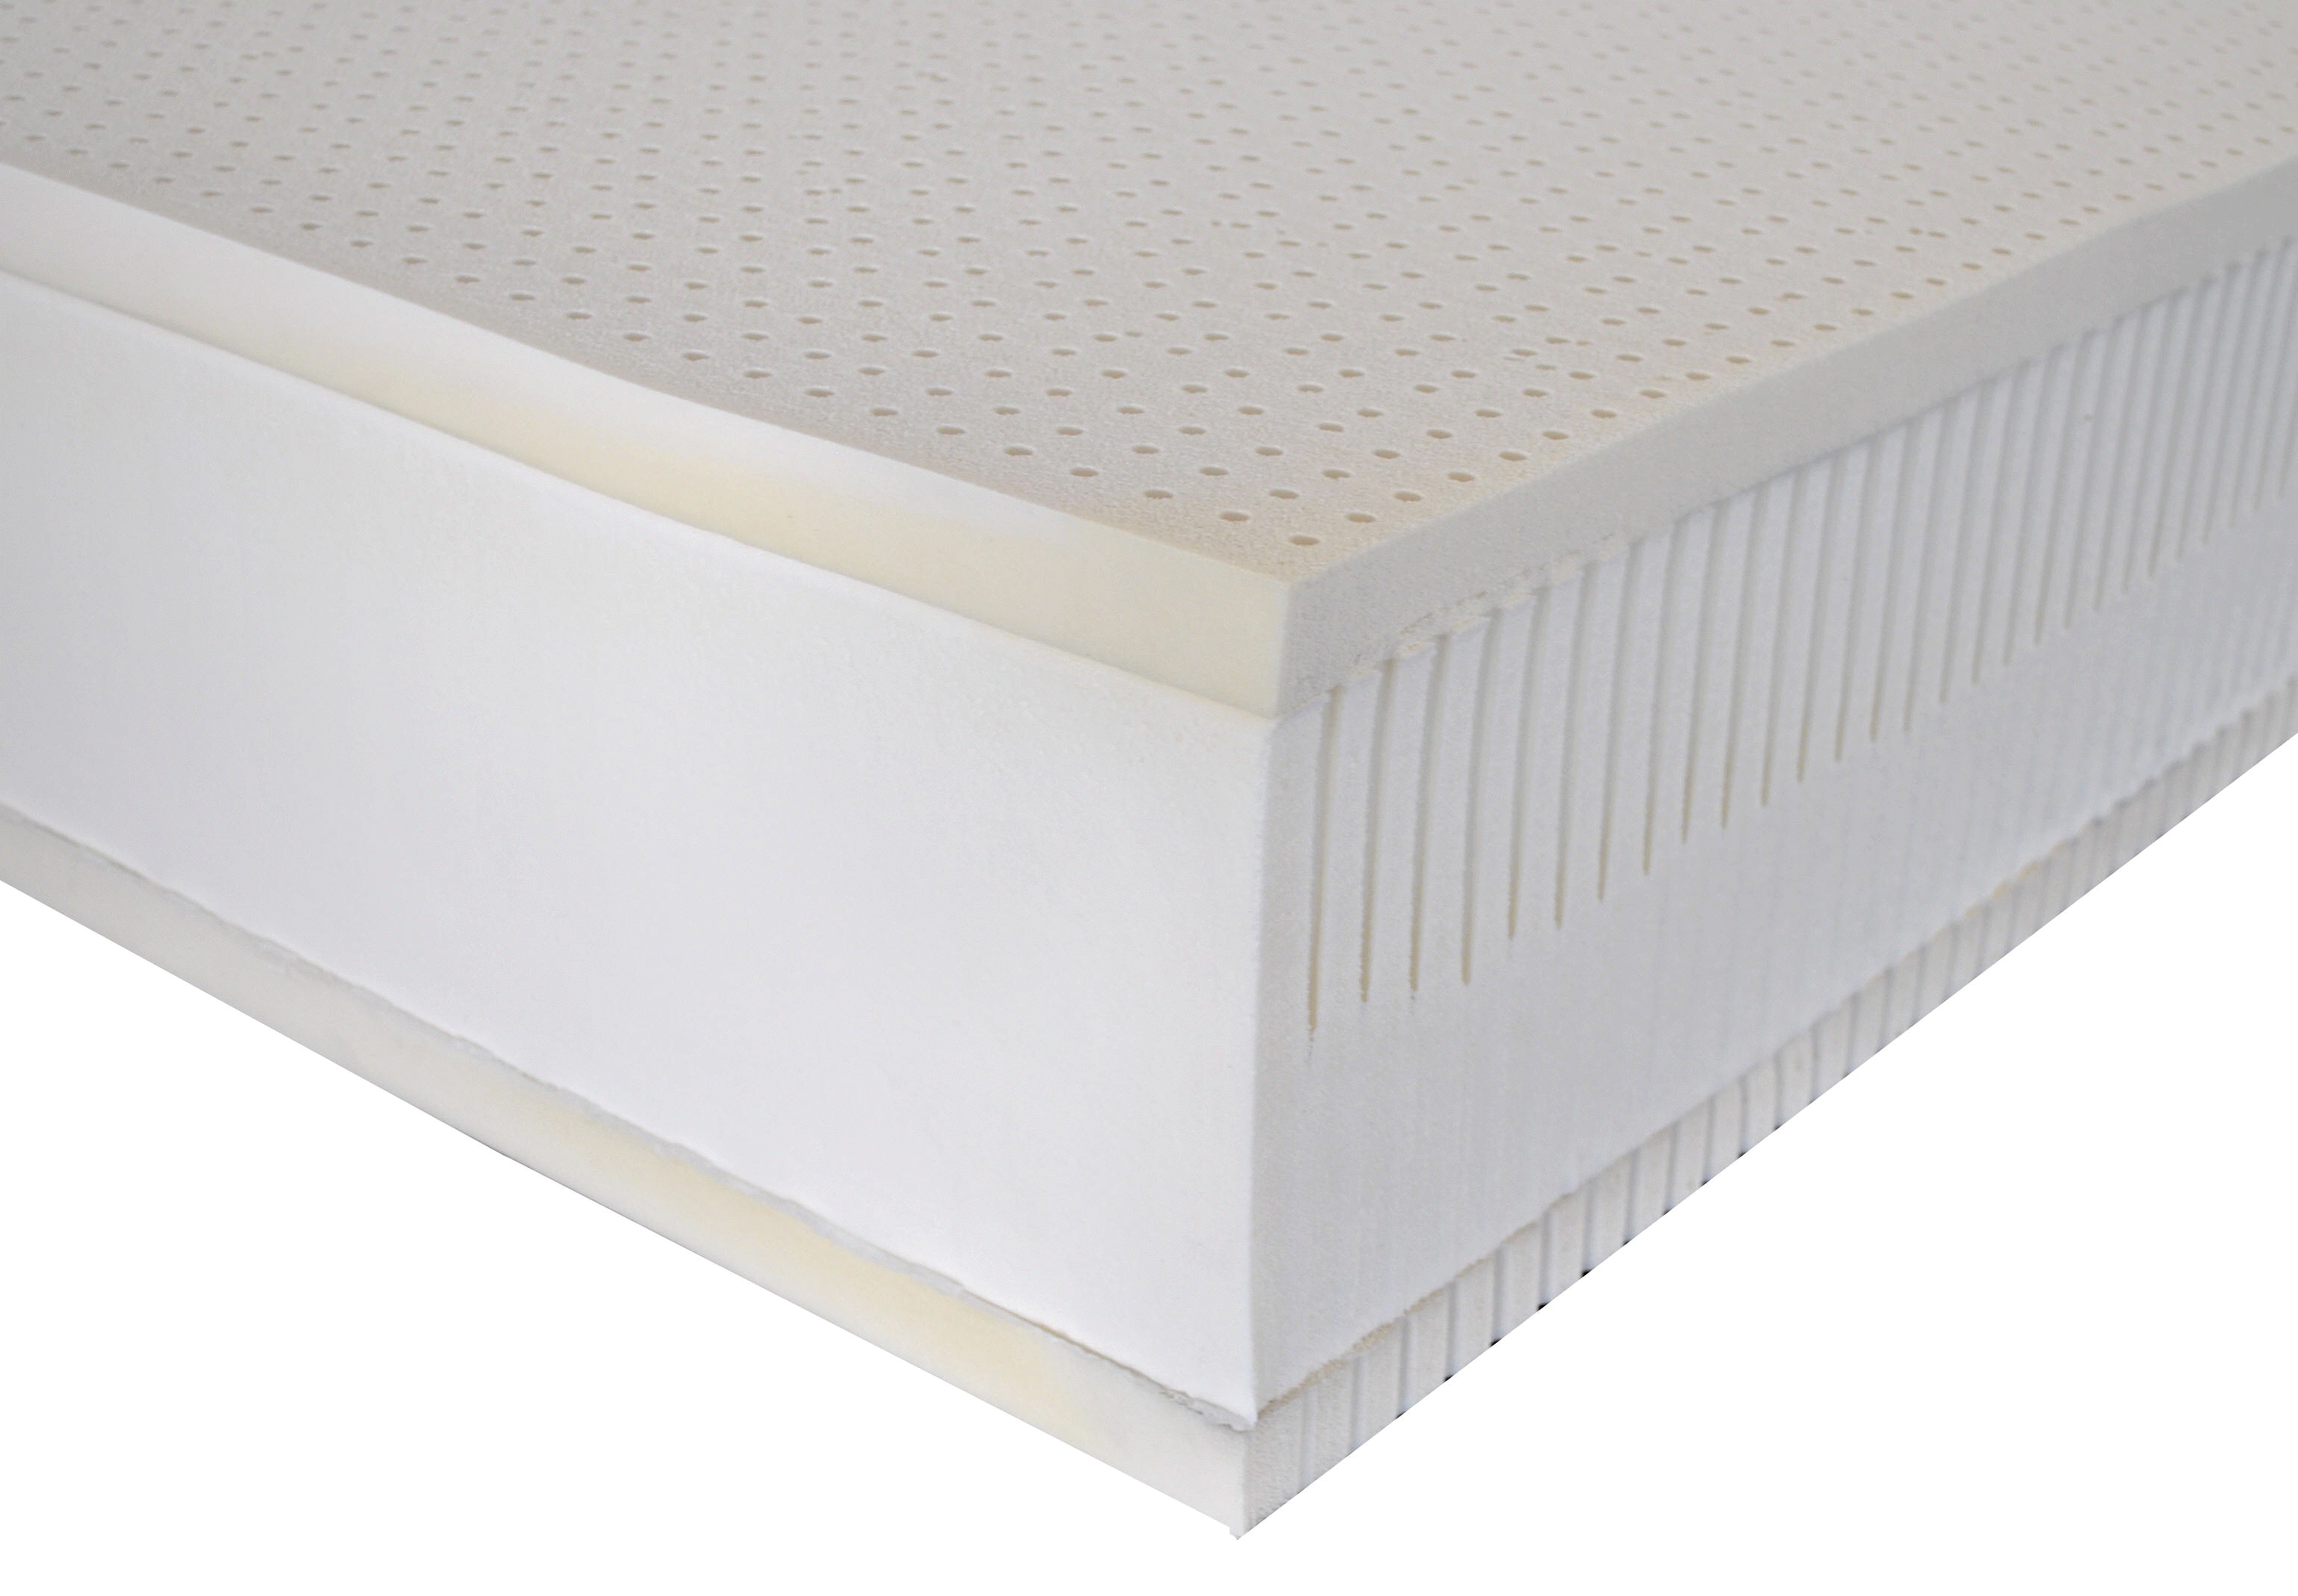 9" certified organic cotton and wool latex-pedic high profile natural bed